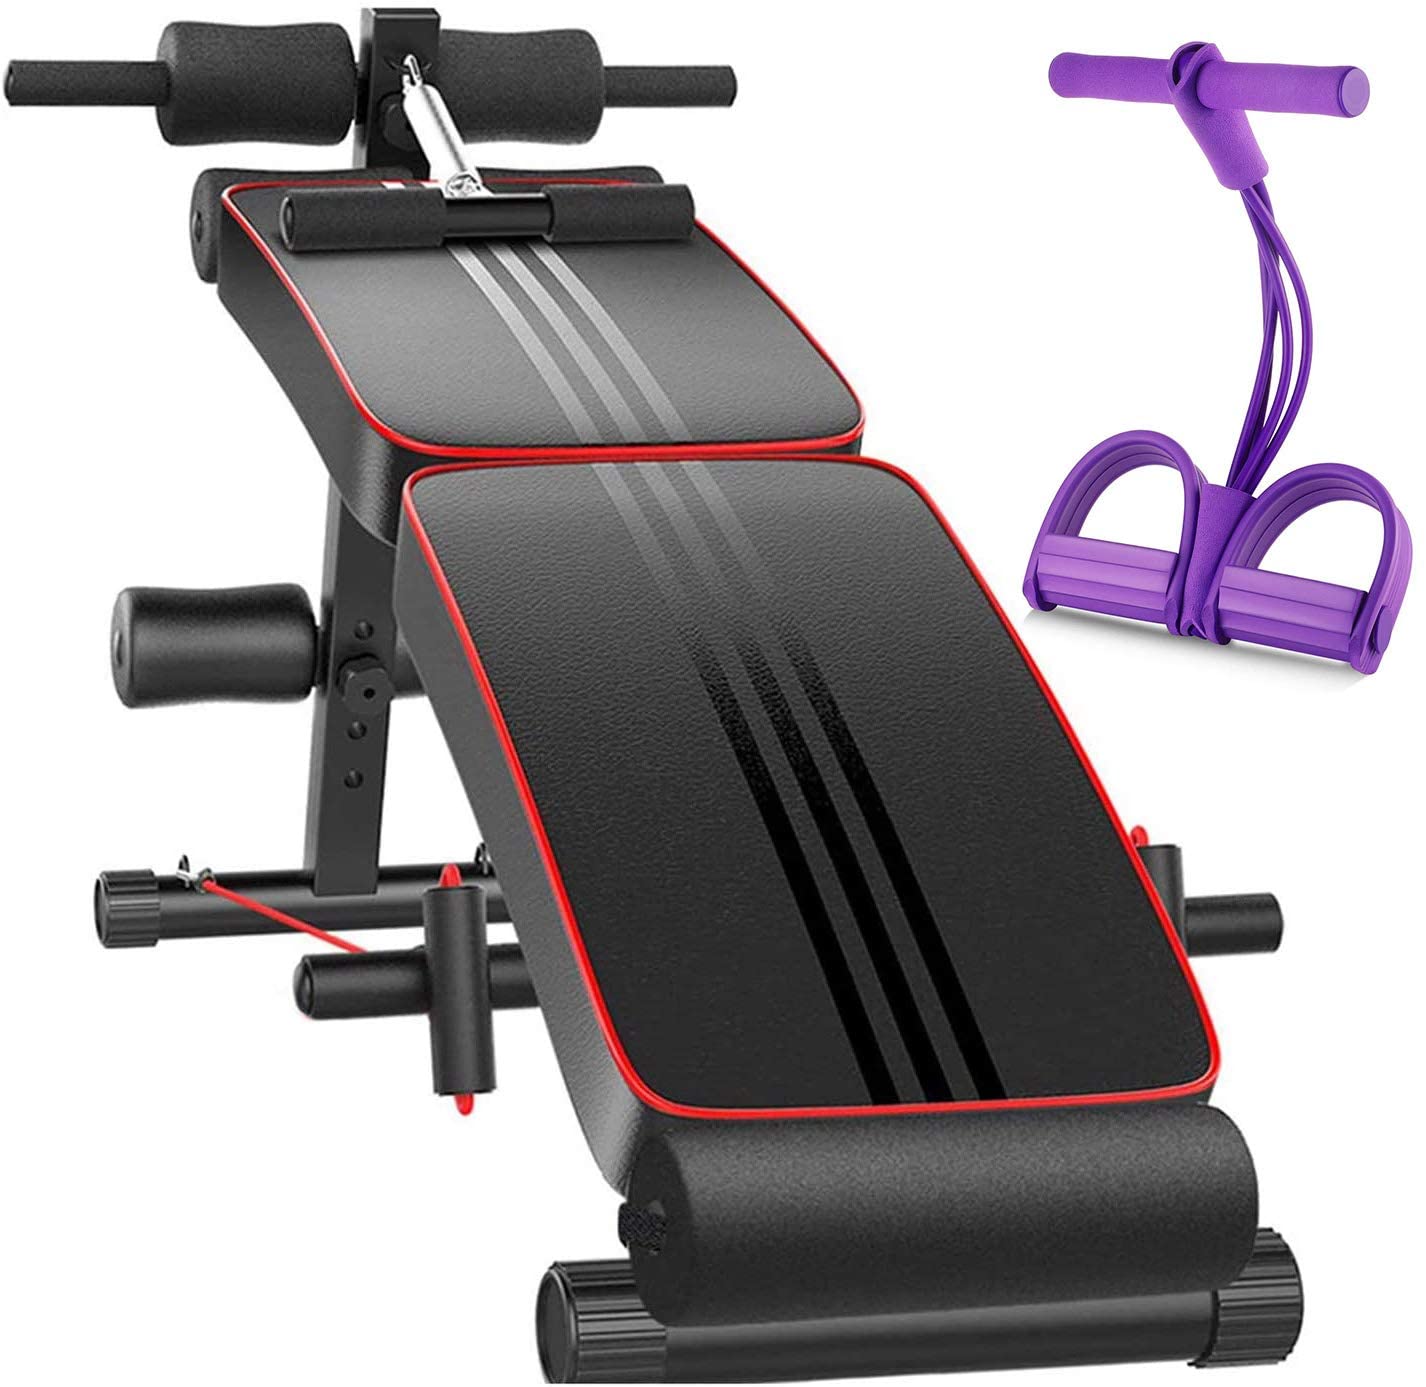 Utility Weight Benches for Full Body Workout Come with Exercise and Resistance Bands Set Exercise Training Bench Adjustable Sit-up/Push Up Bench Workout Flat/Incline/Decline Bench Press for Home Gym Weight Capacity NEWBUY 7 Levels Foldable Weight Bench